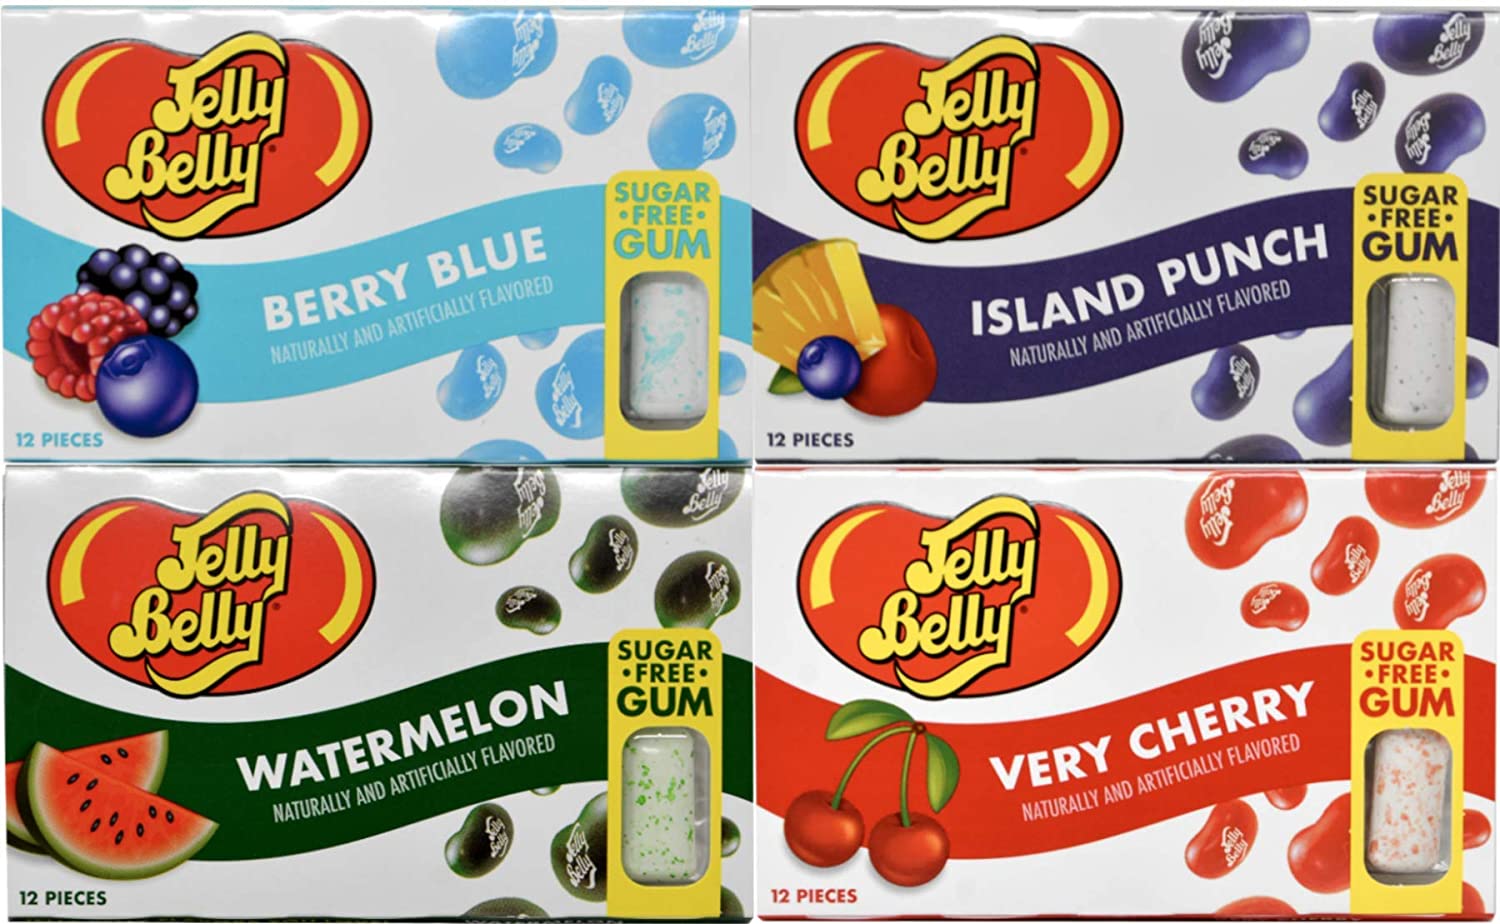 Jelly Belly now has a long lasting sugar-free gum